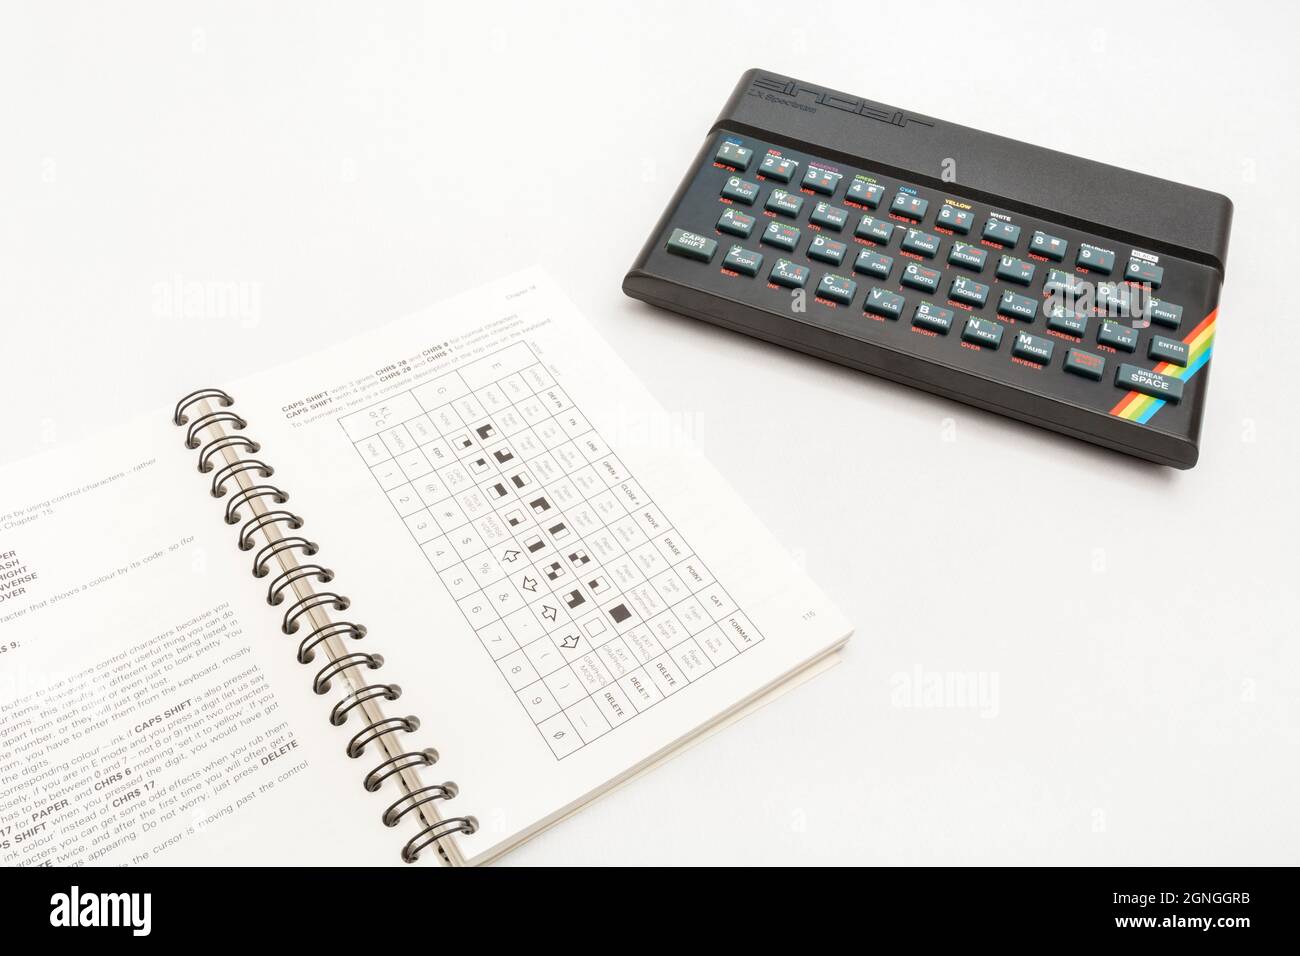 1982 Sinclair ZX Spectrum & BASIC programming manual on off-white background. Ancient / Vintage 8-bit home computer. Inspired a generation. Seen Notes. Stock Photo